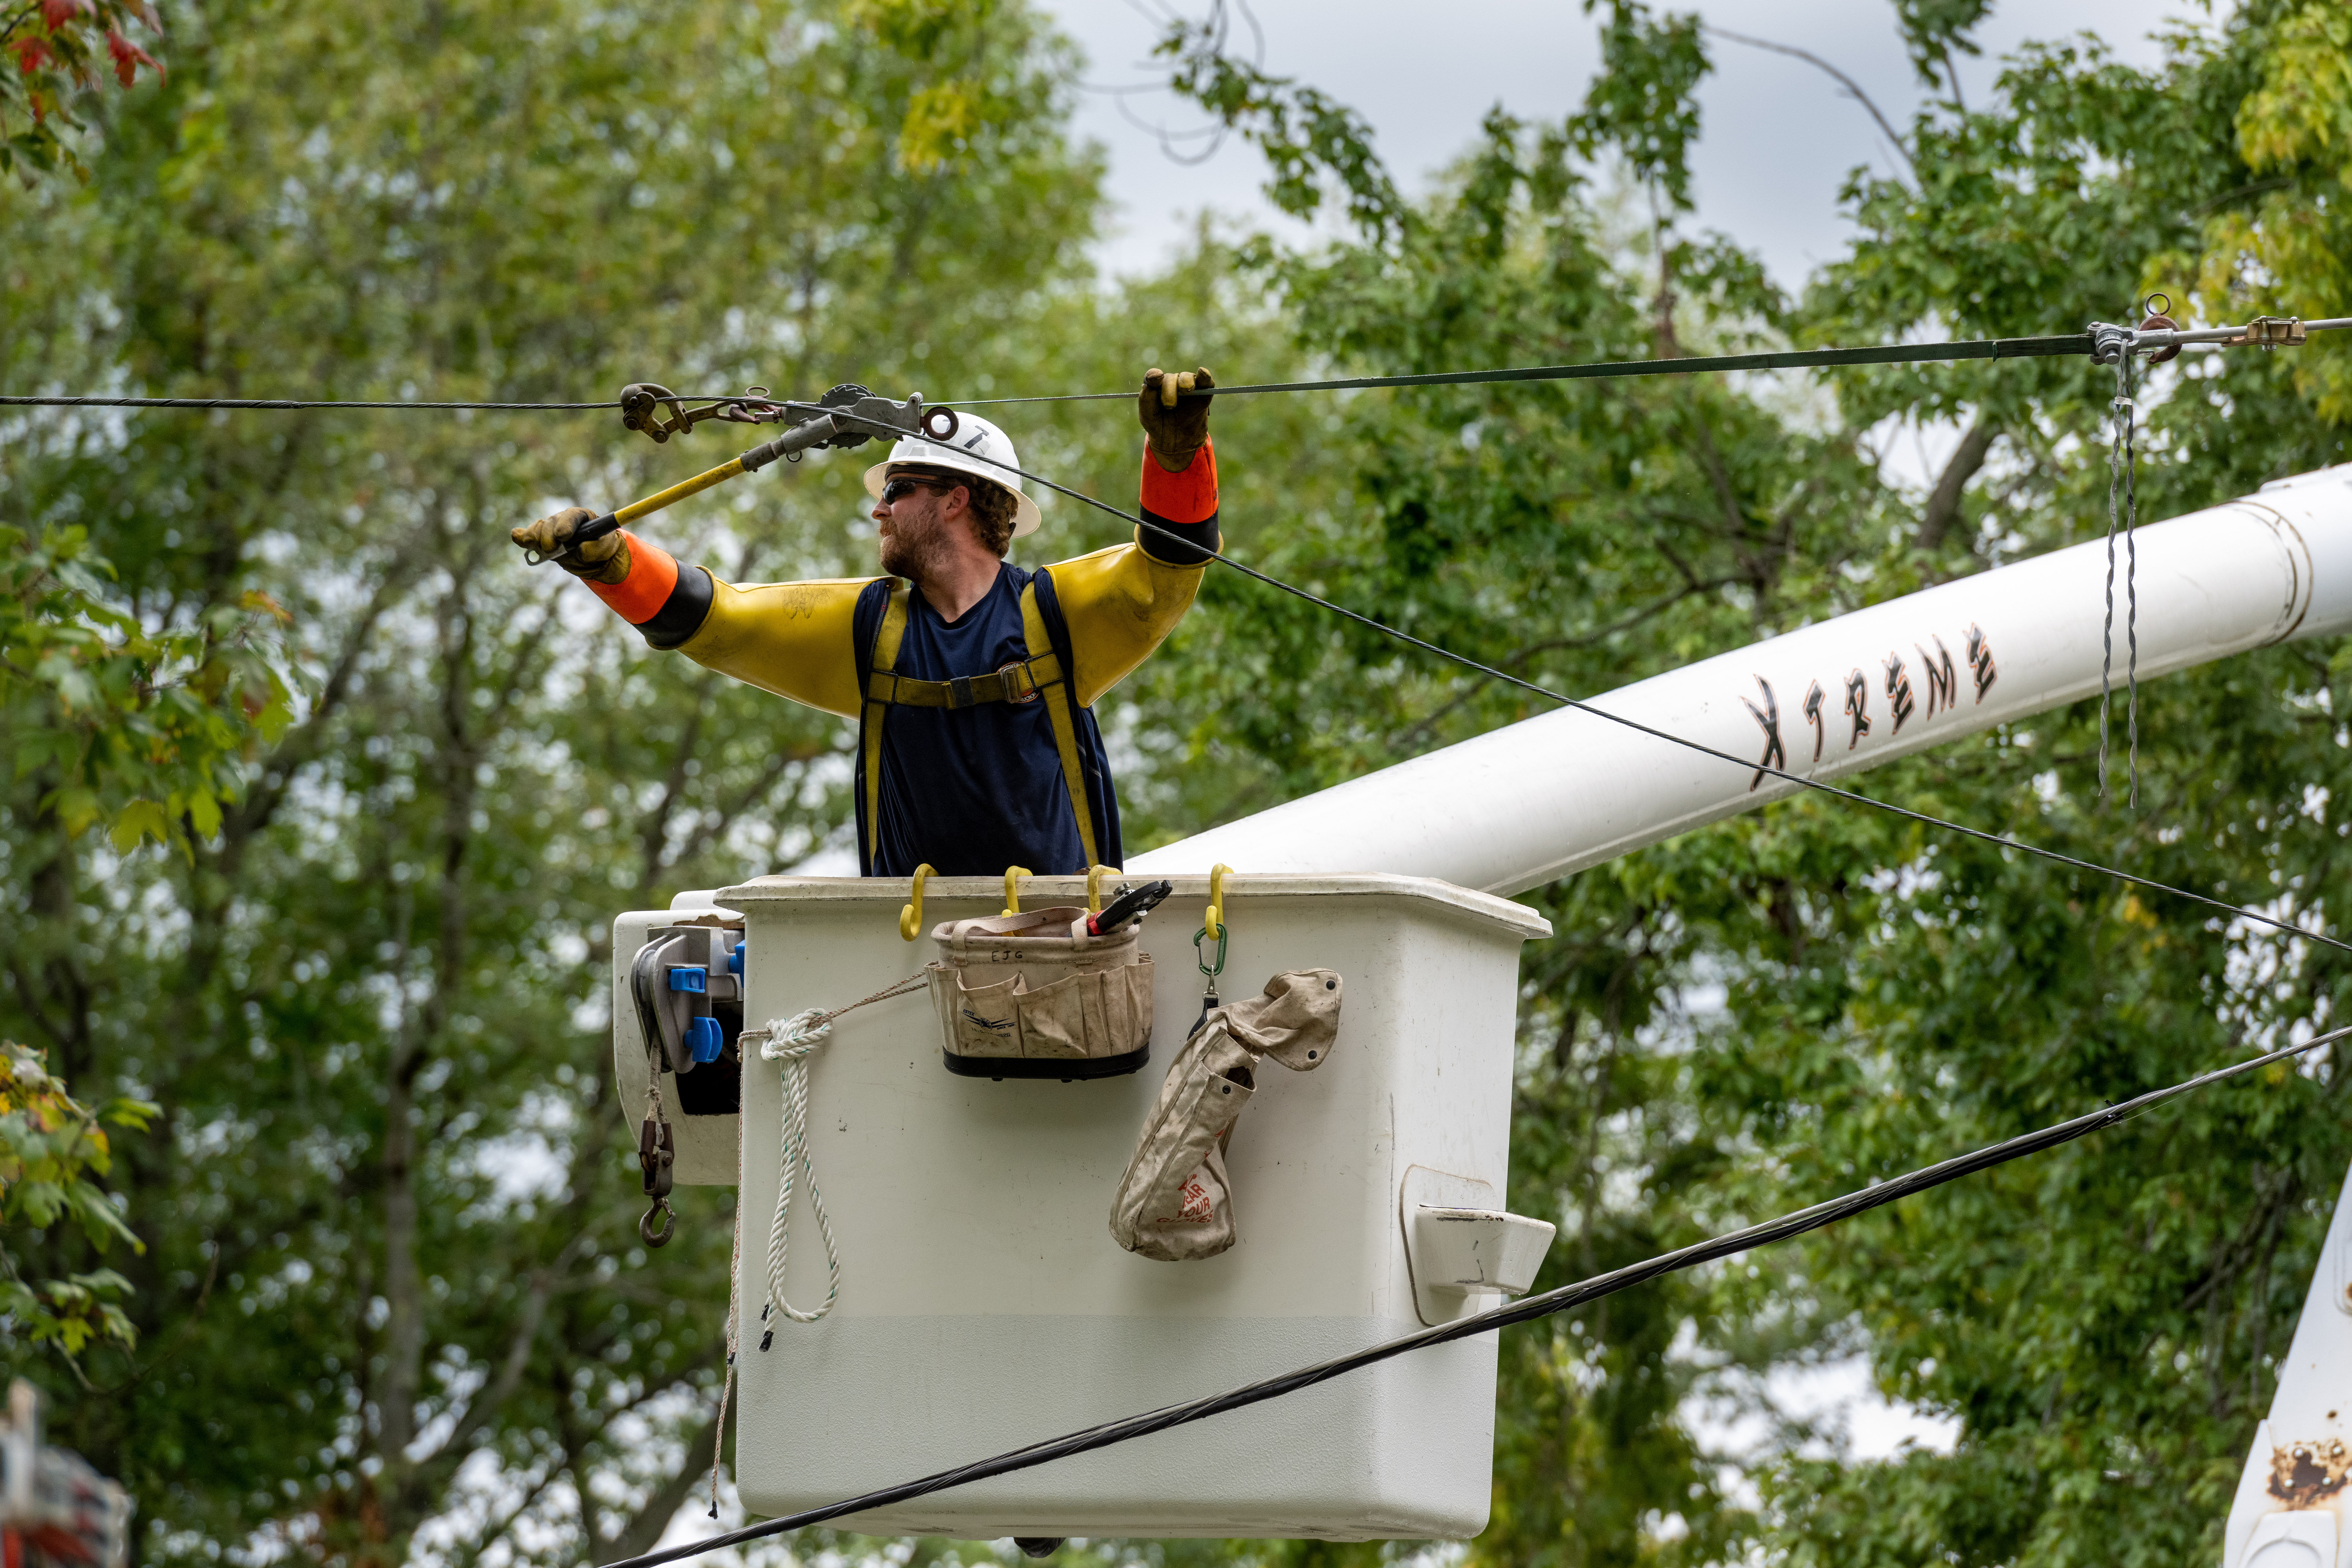 DTE Energy improving reliability by investing over $1.3B in capital improvement projects